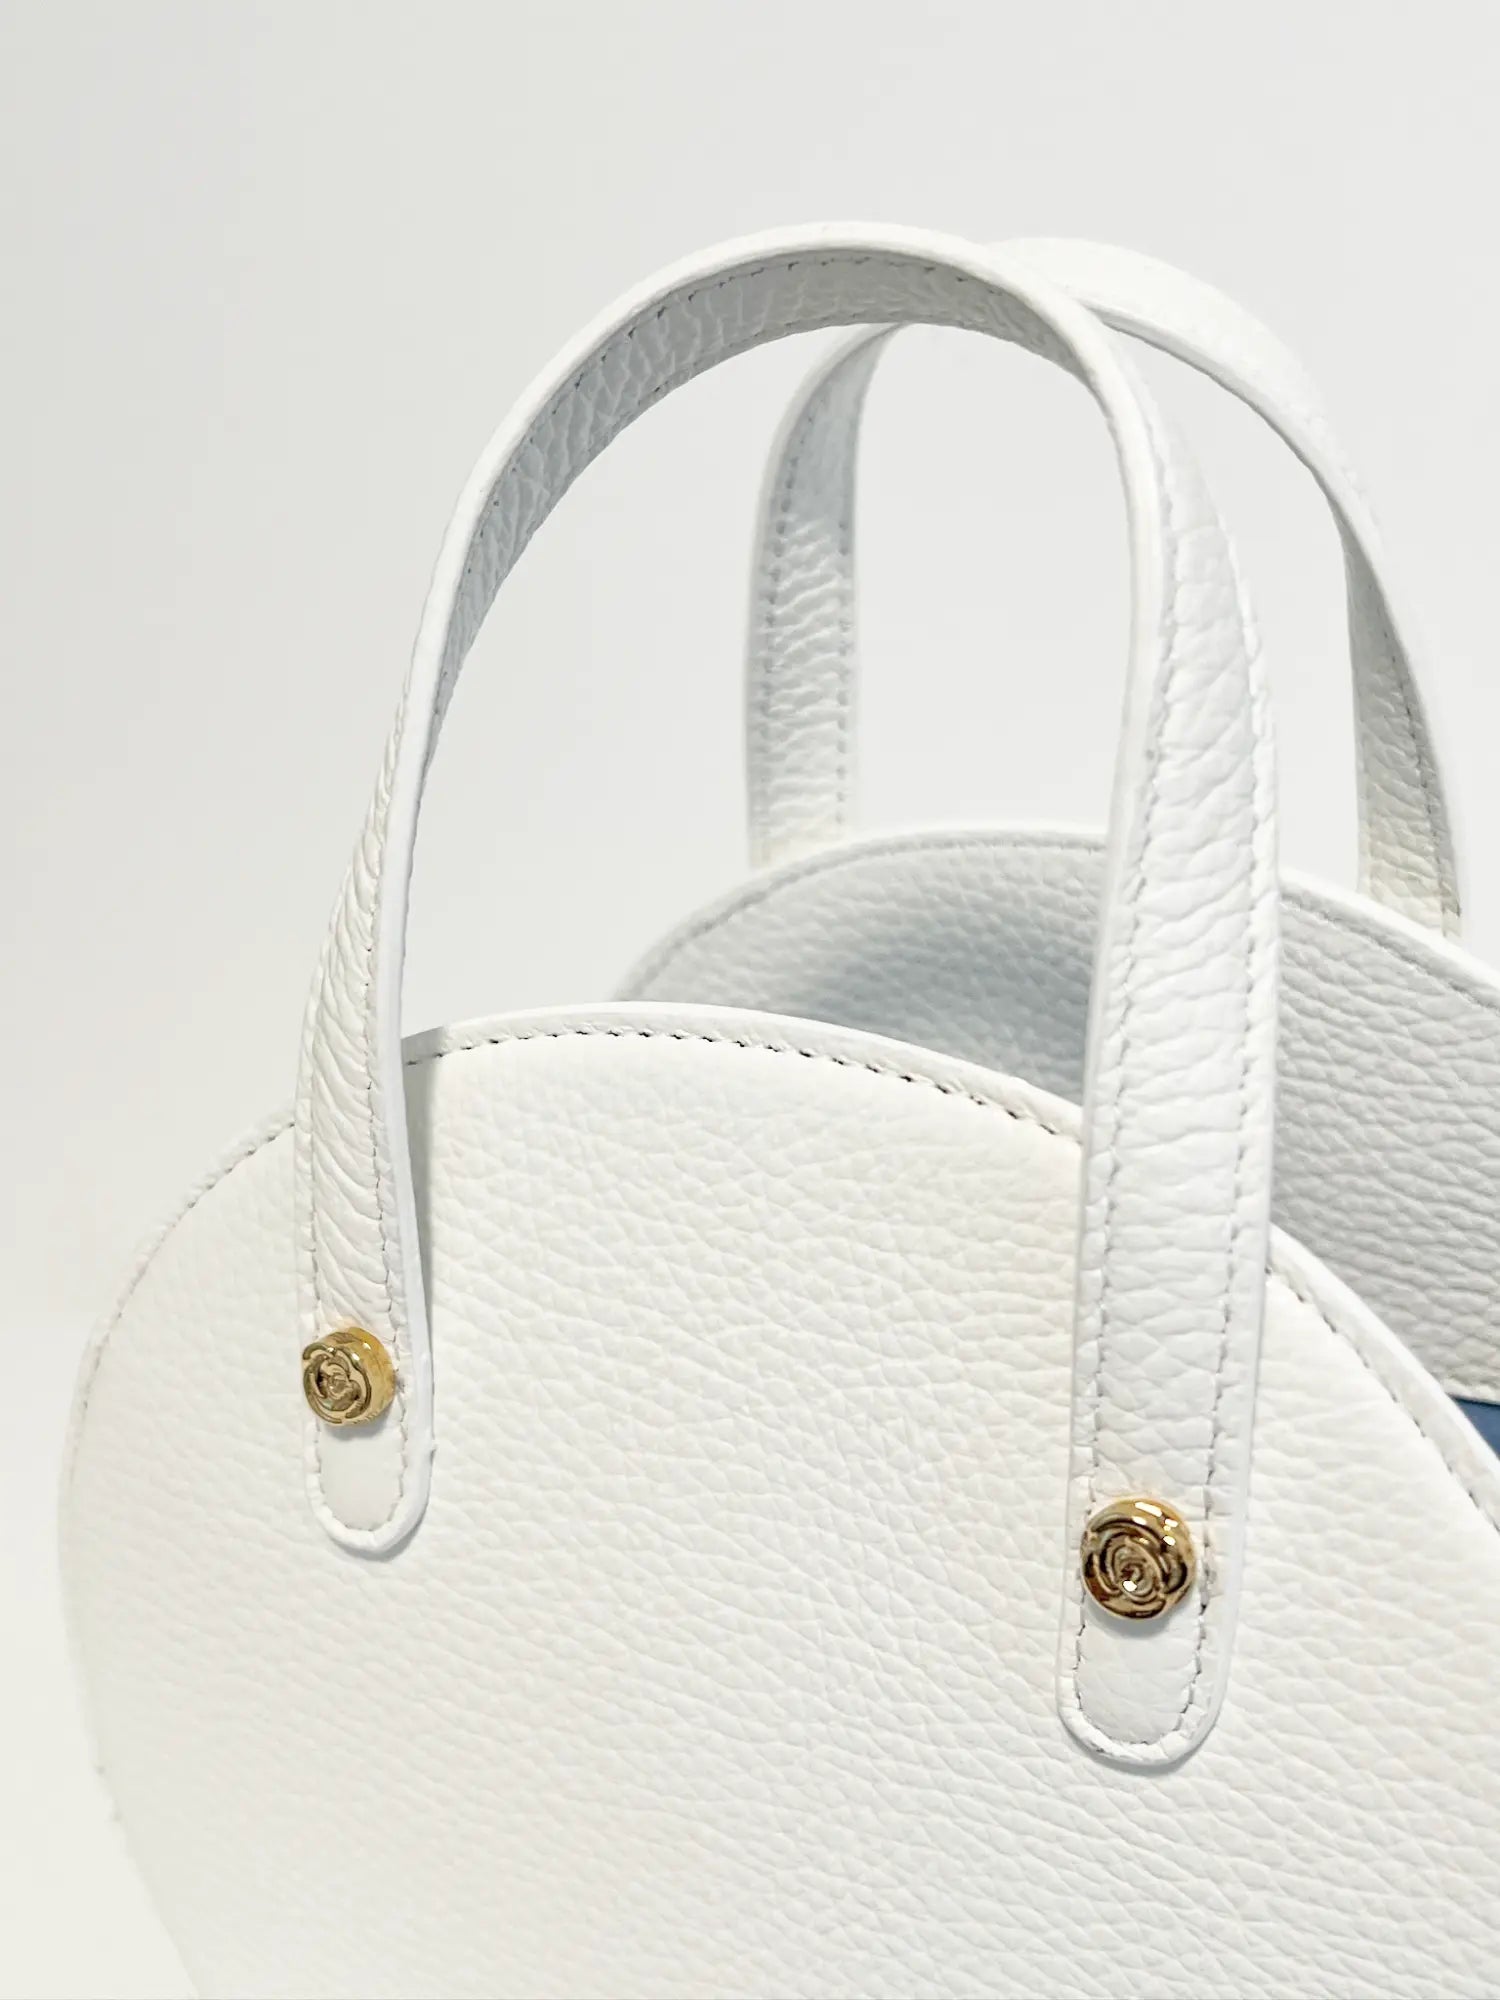 Close-up of a white textured Harper Hat Box Handbag White Leather handbag with two handles and golden metallic clasps, presented against a light gray background from The Bella Rosa Collection.